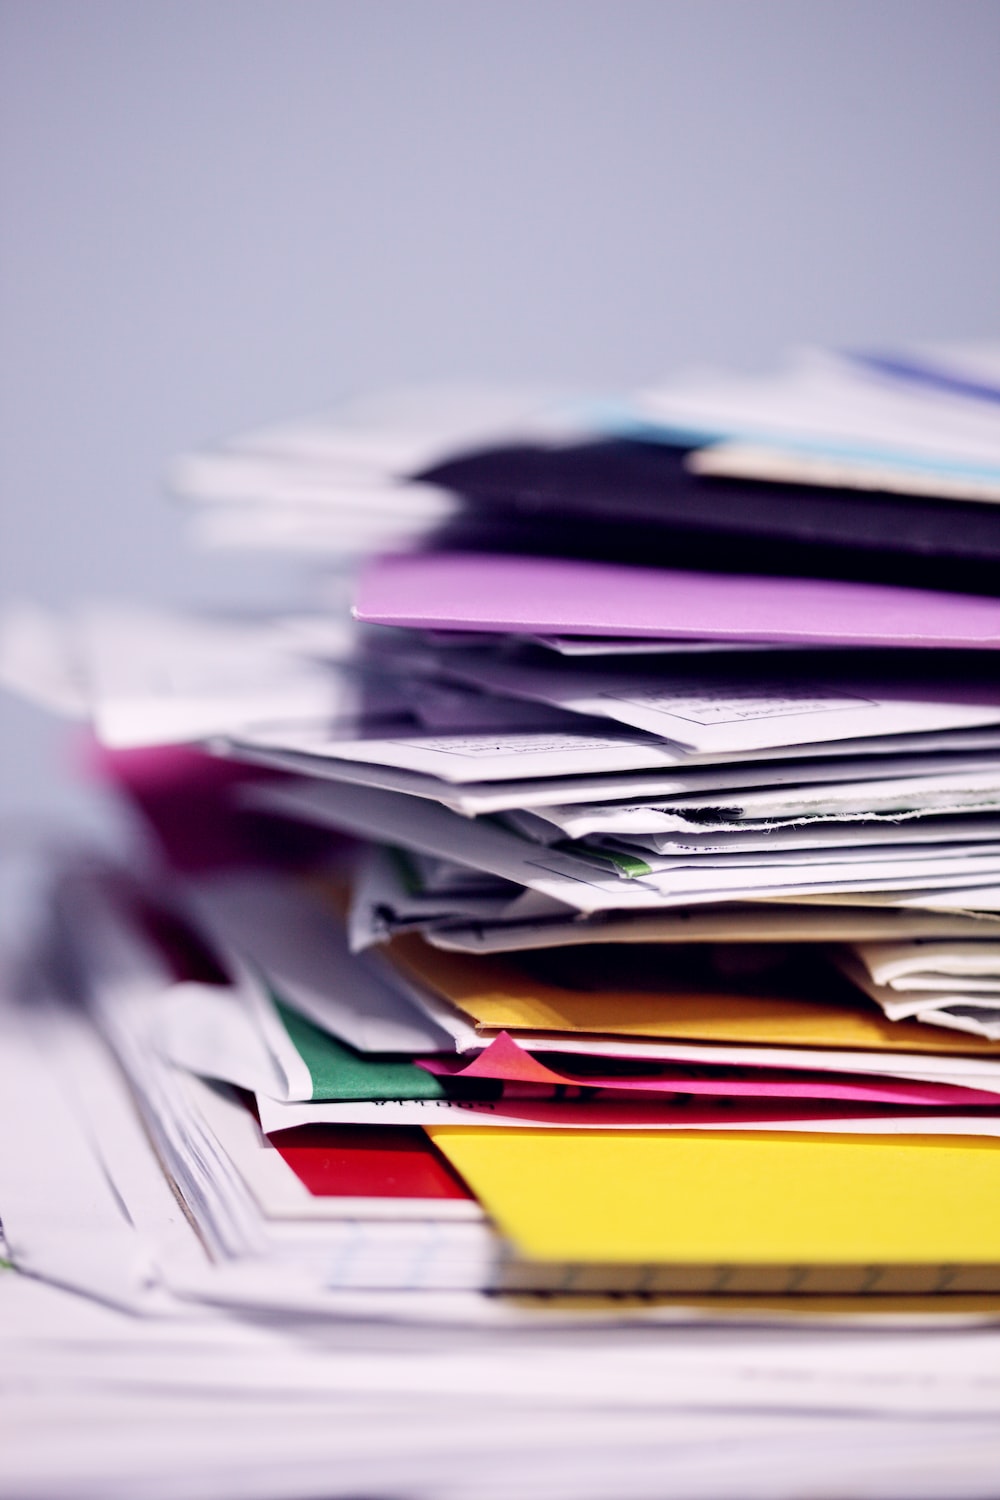 What are the types of filing?